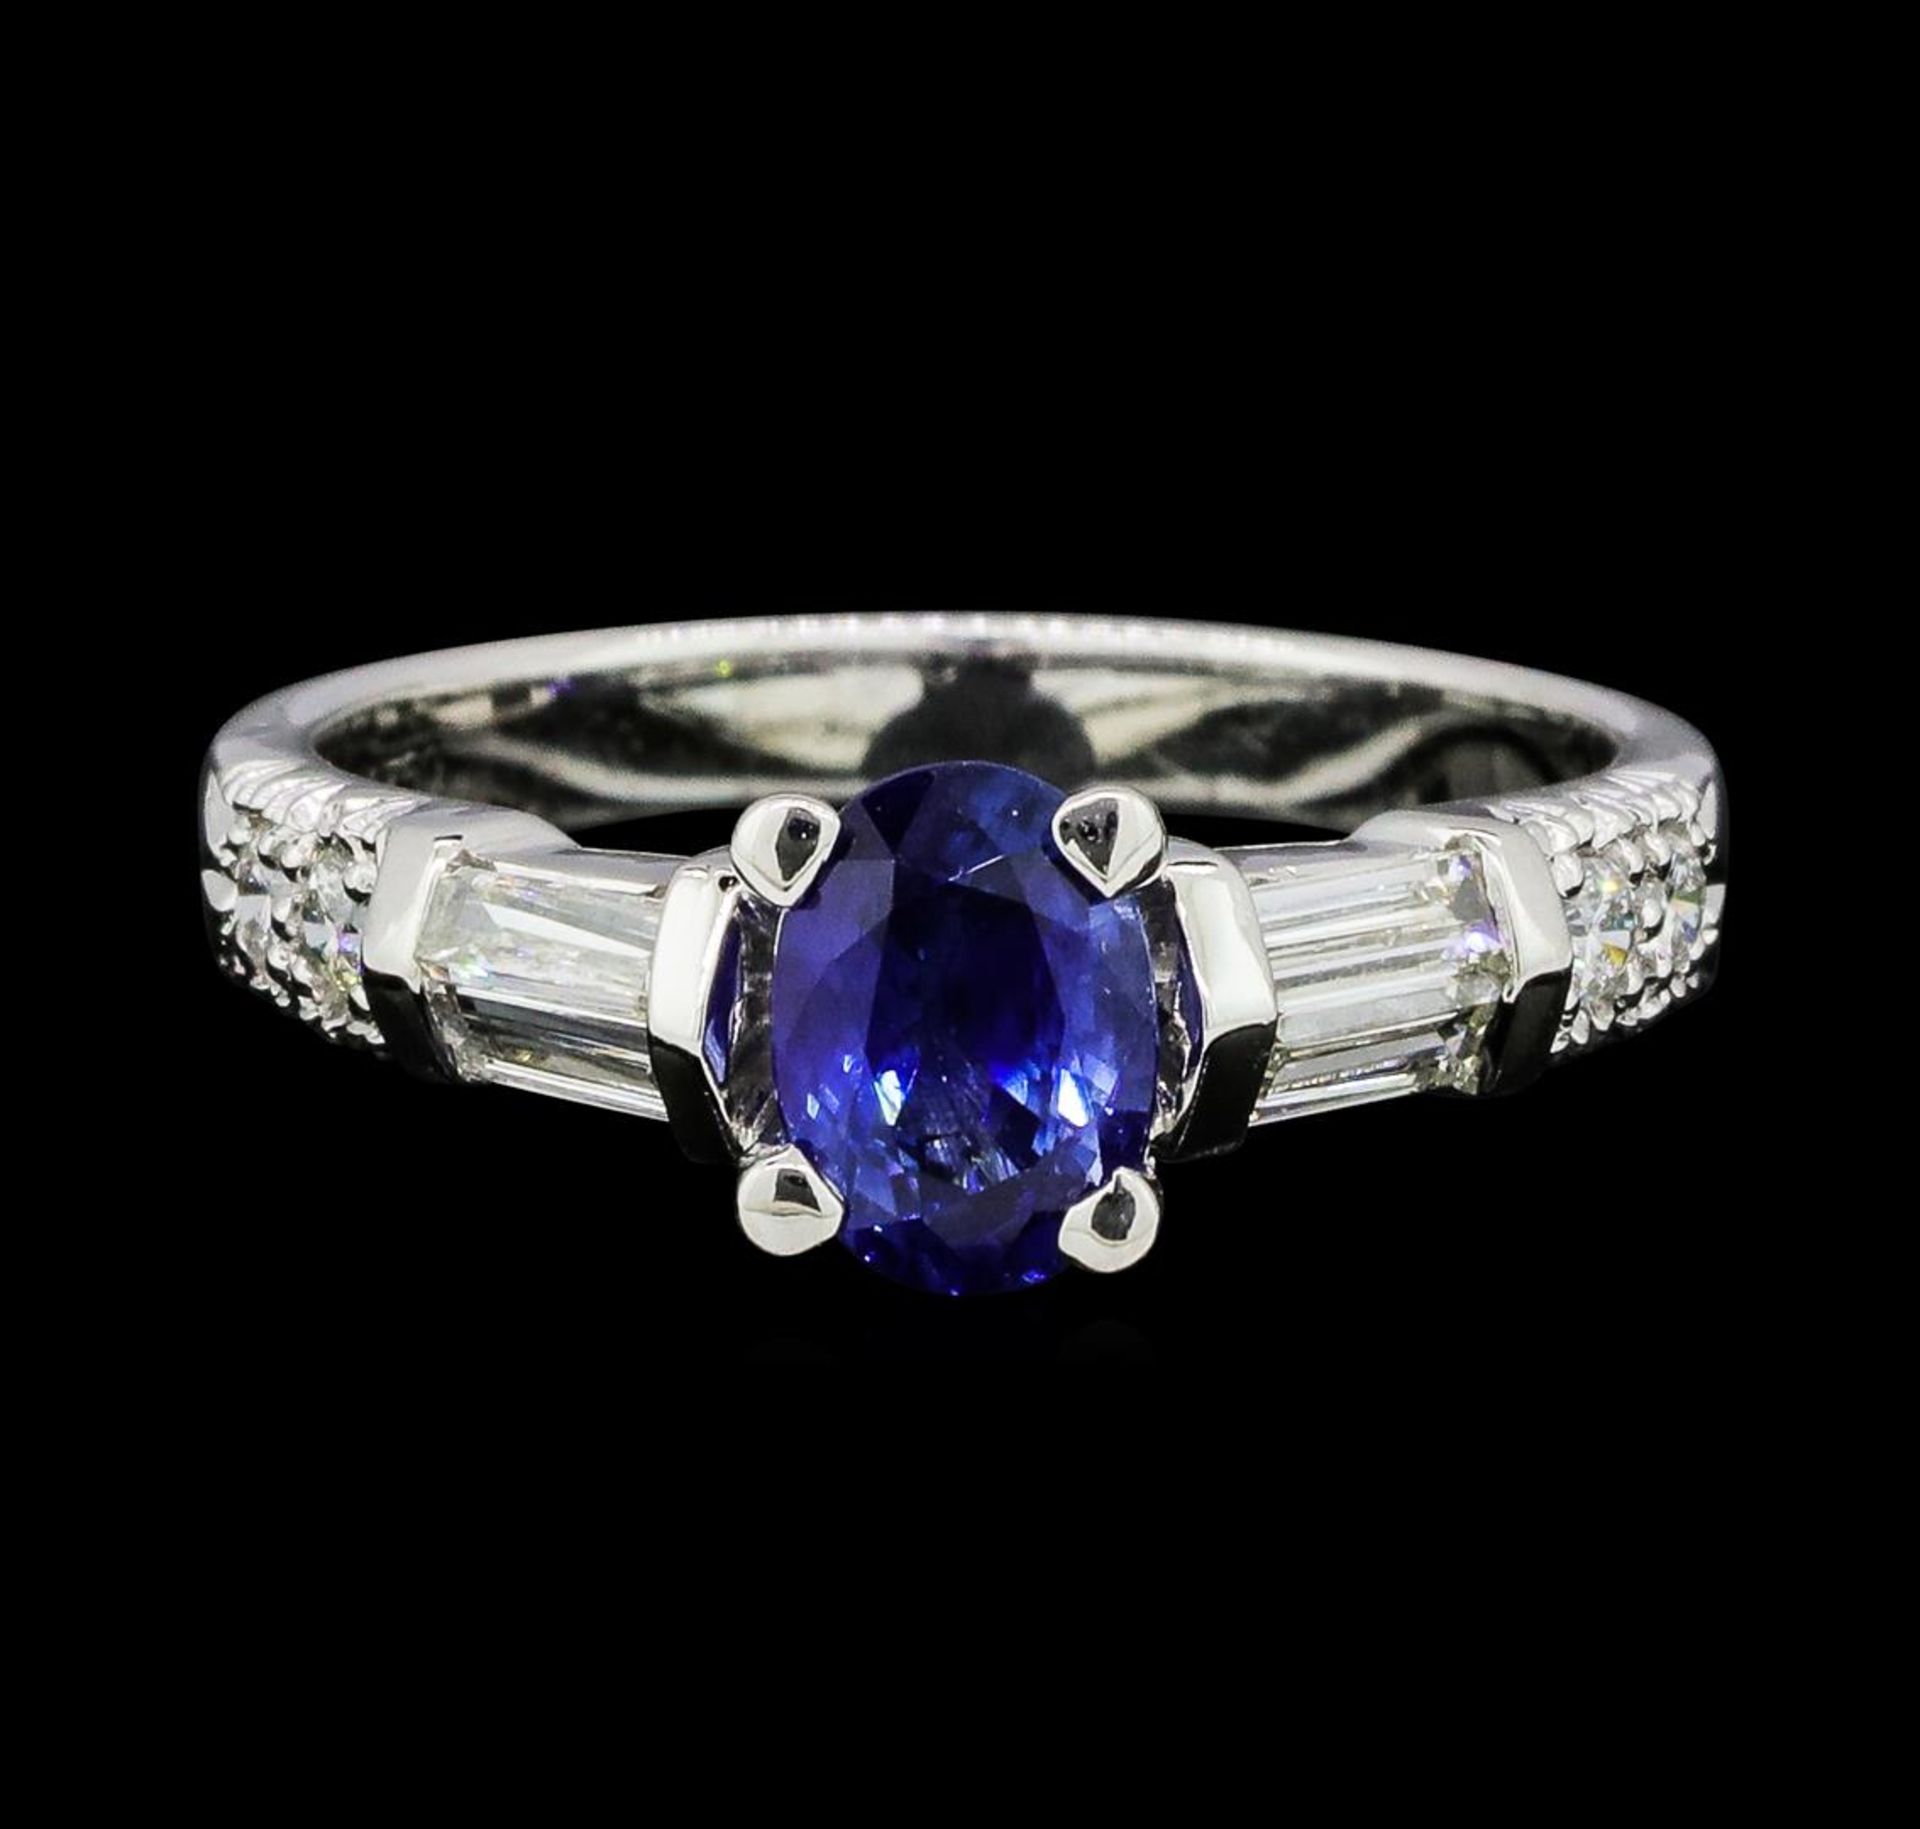 1.00 ctw Sapphire and Diamond Ring - 18KT White Gold - Image 2 of 4